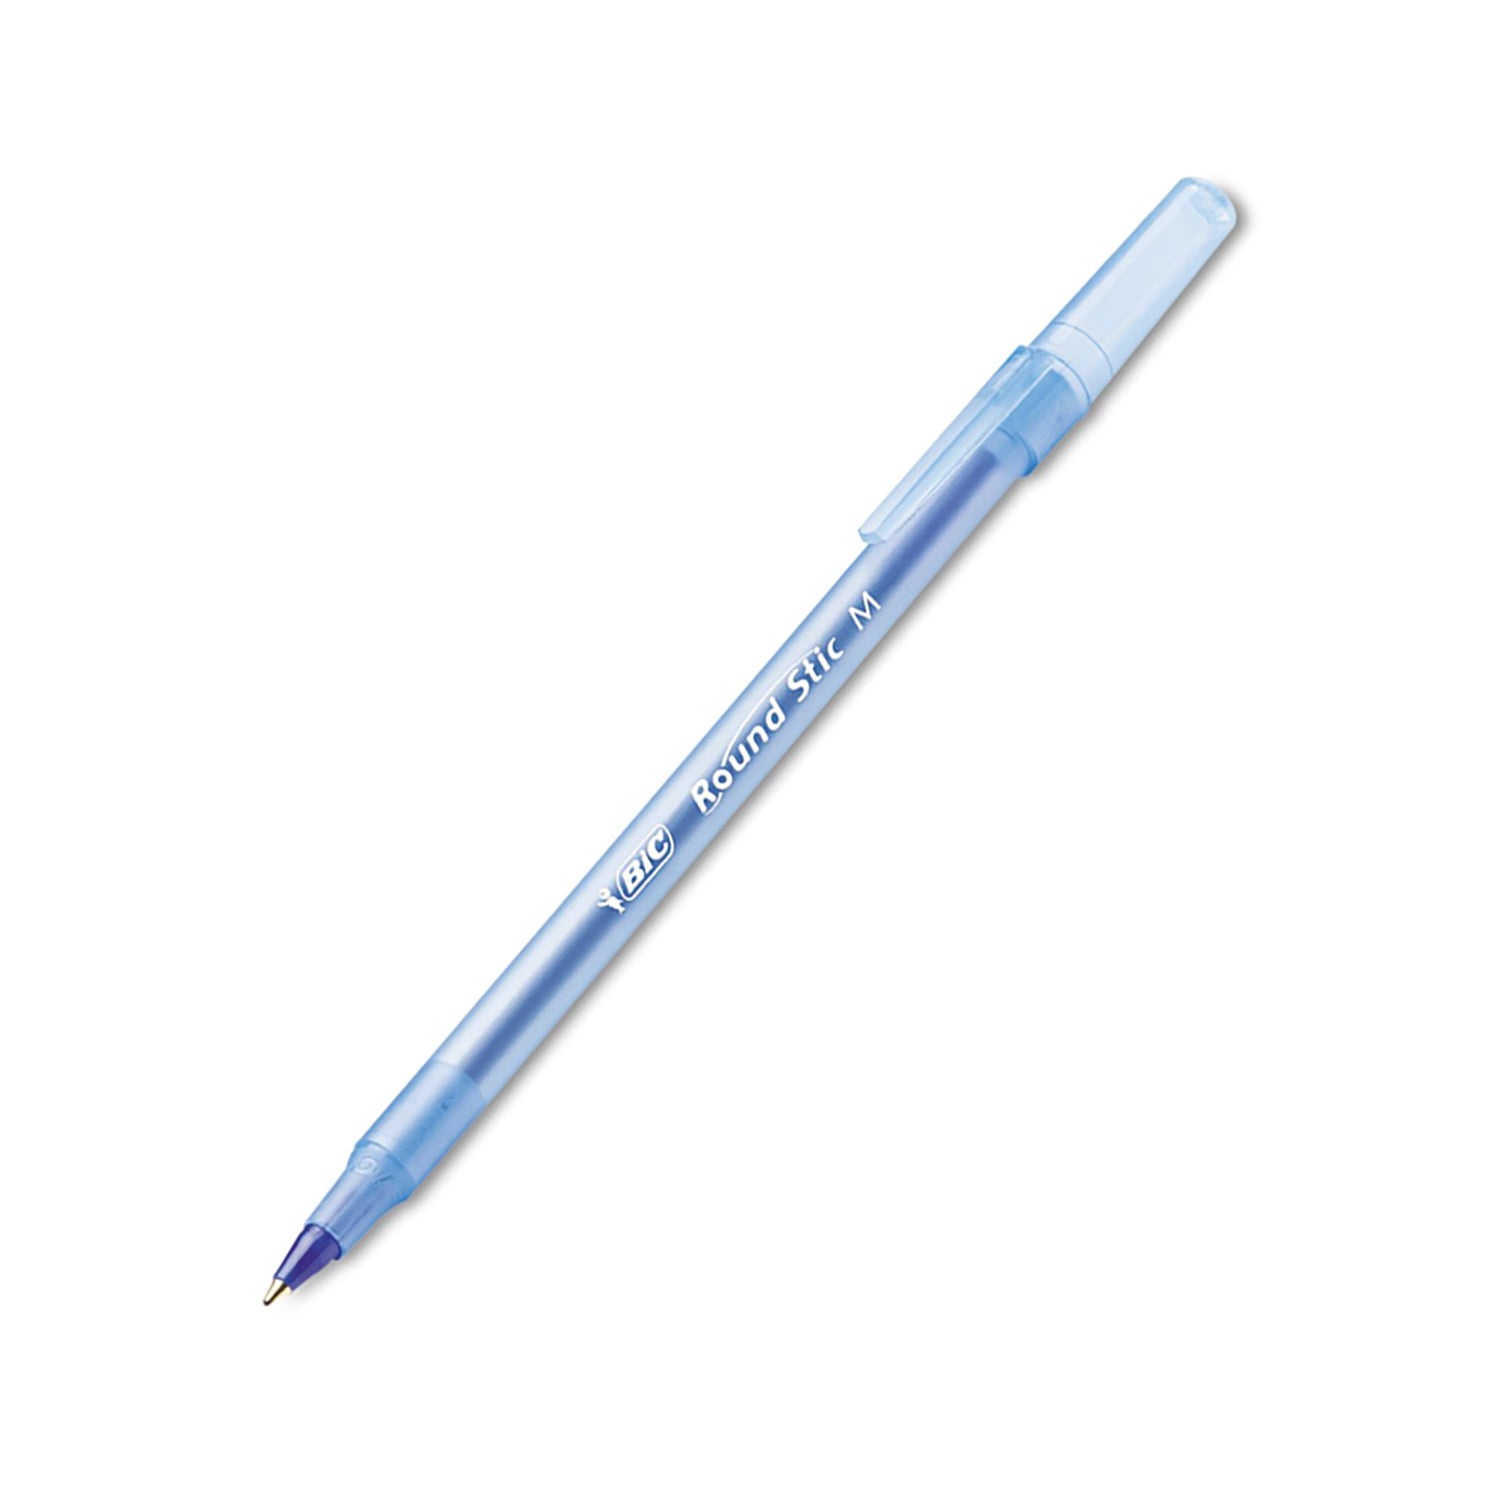 Round Stic® Xtra Life Ball Pen, Blue, 60 Per Pack, 2 Packs